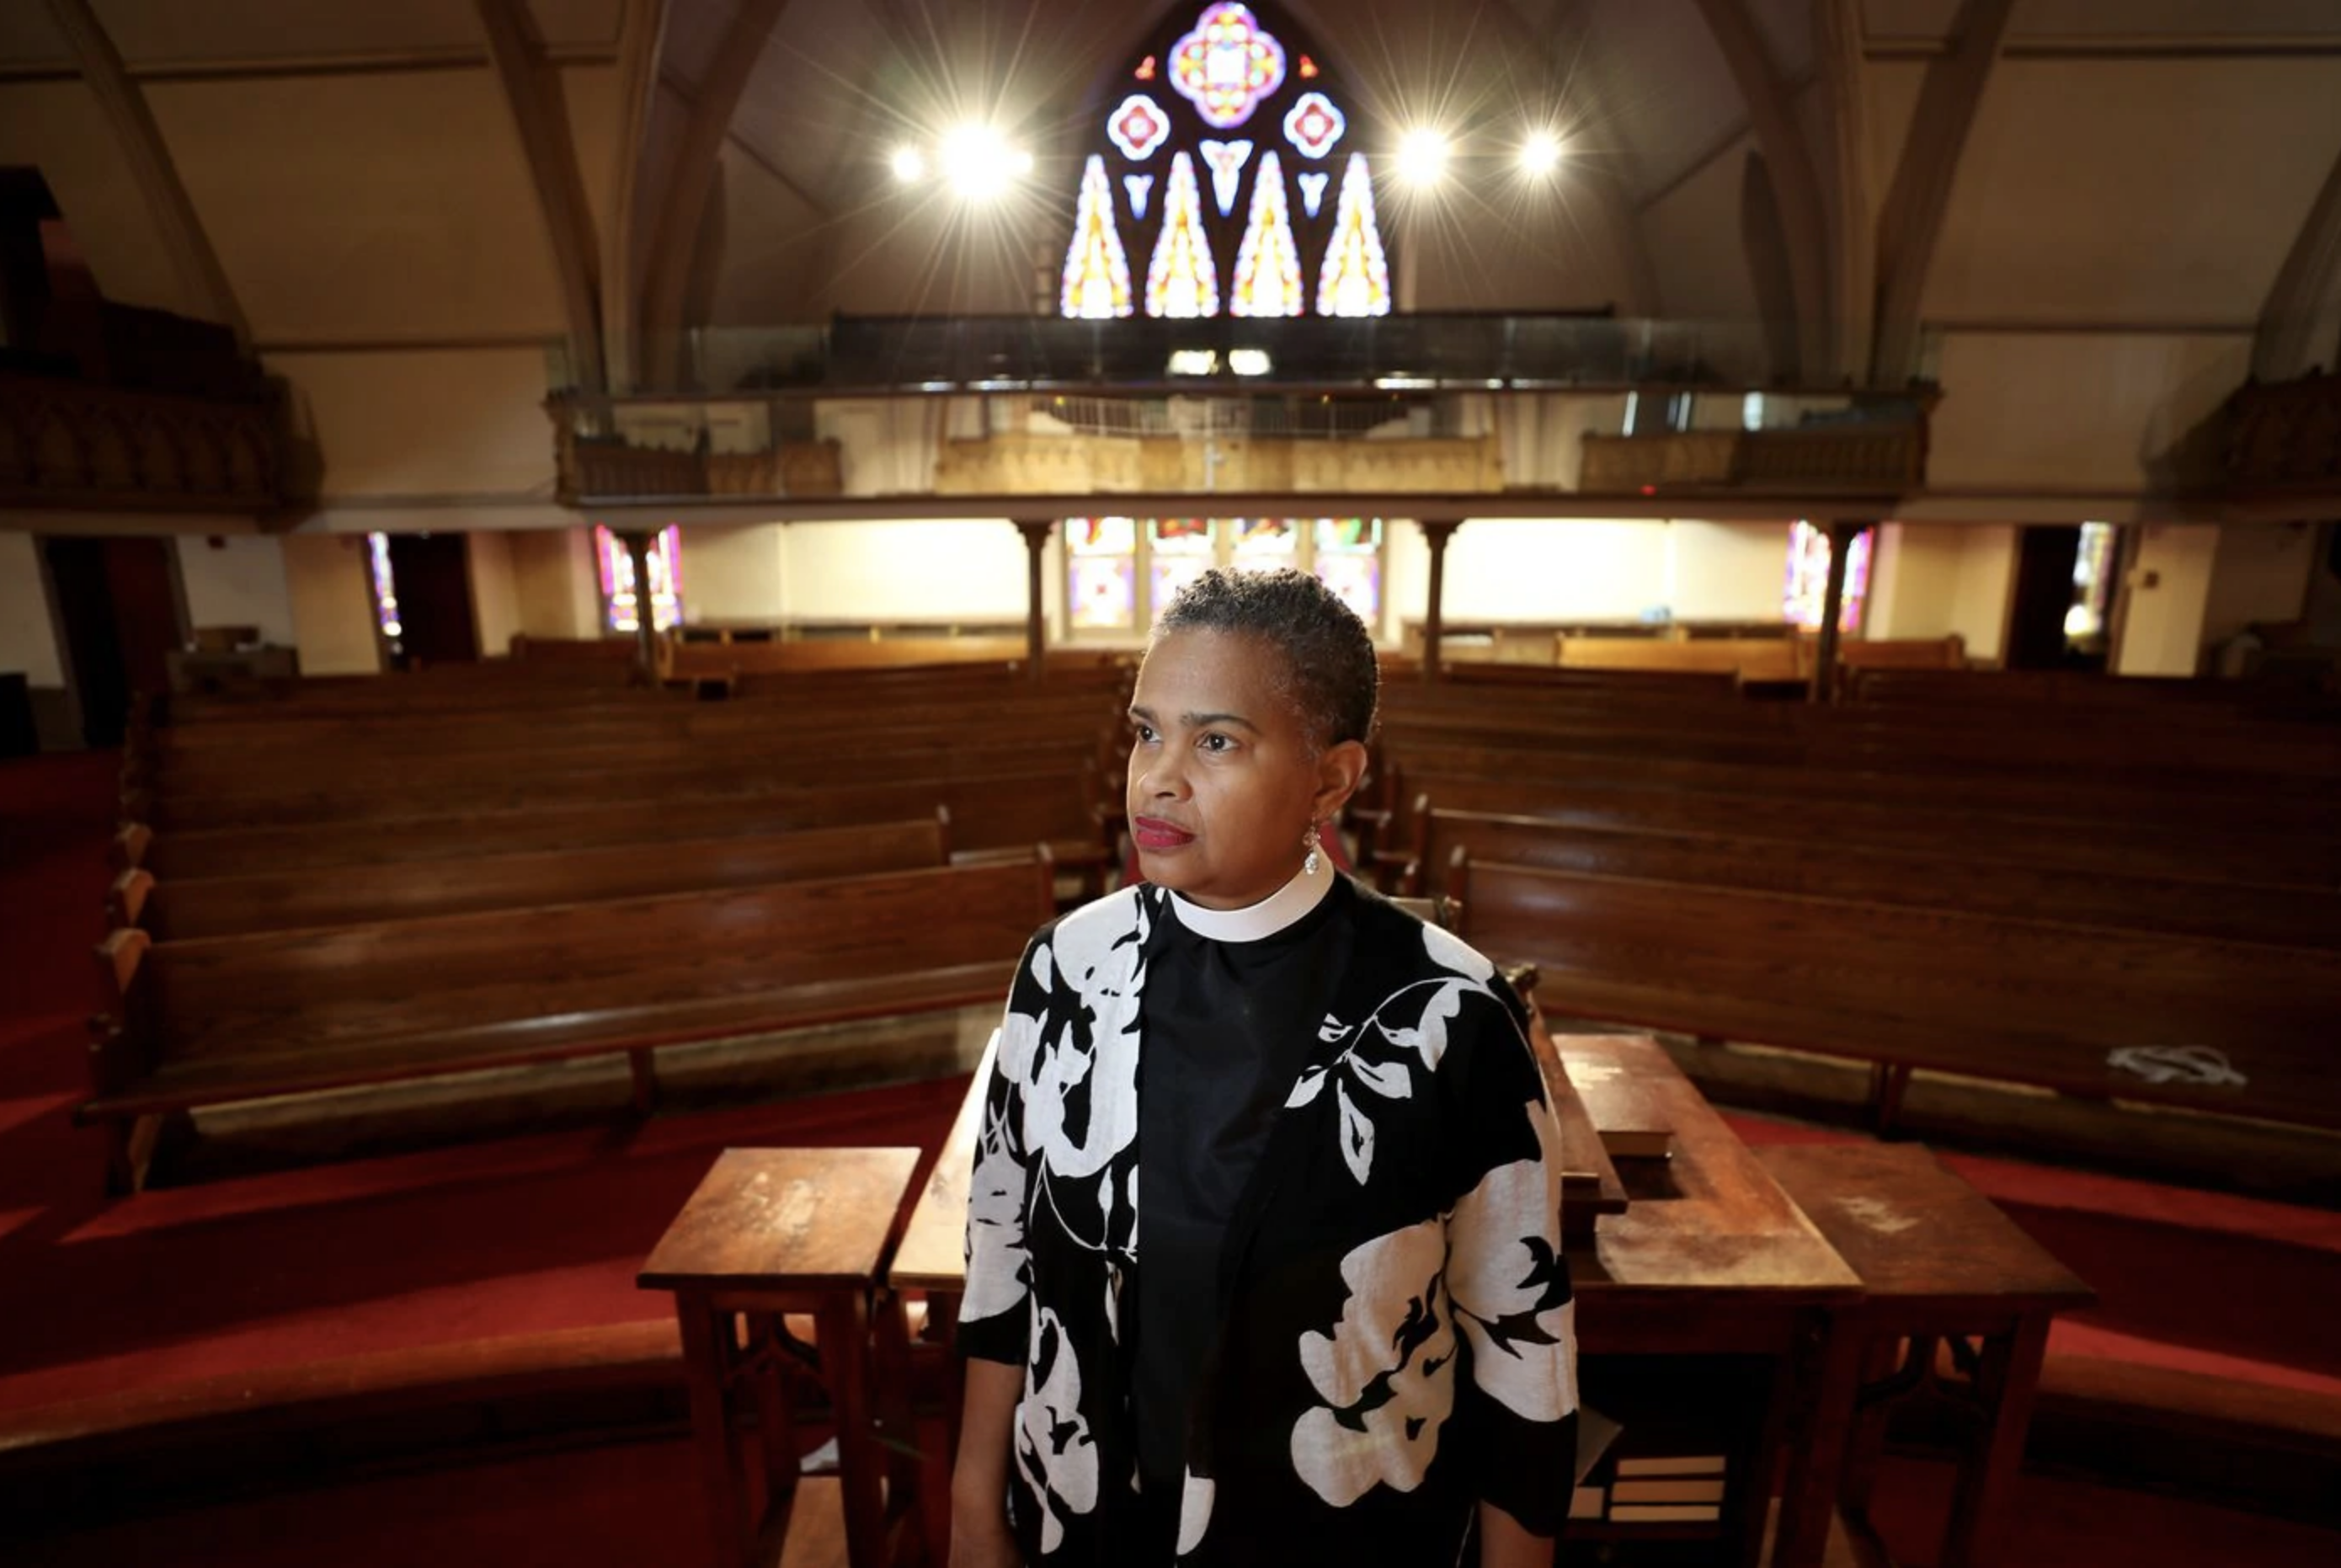 Leslie D. Callahan, pastor of St. Paul's Baptist Church, poses for a portrait, at her church in North Philadelphia on April 8. Image by David Maialetti / The Philadelphia Inquirer. United States, 2020.